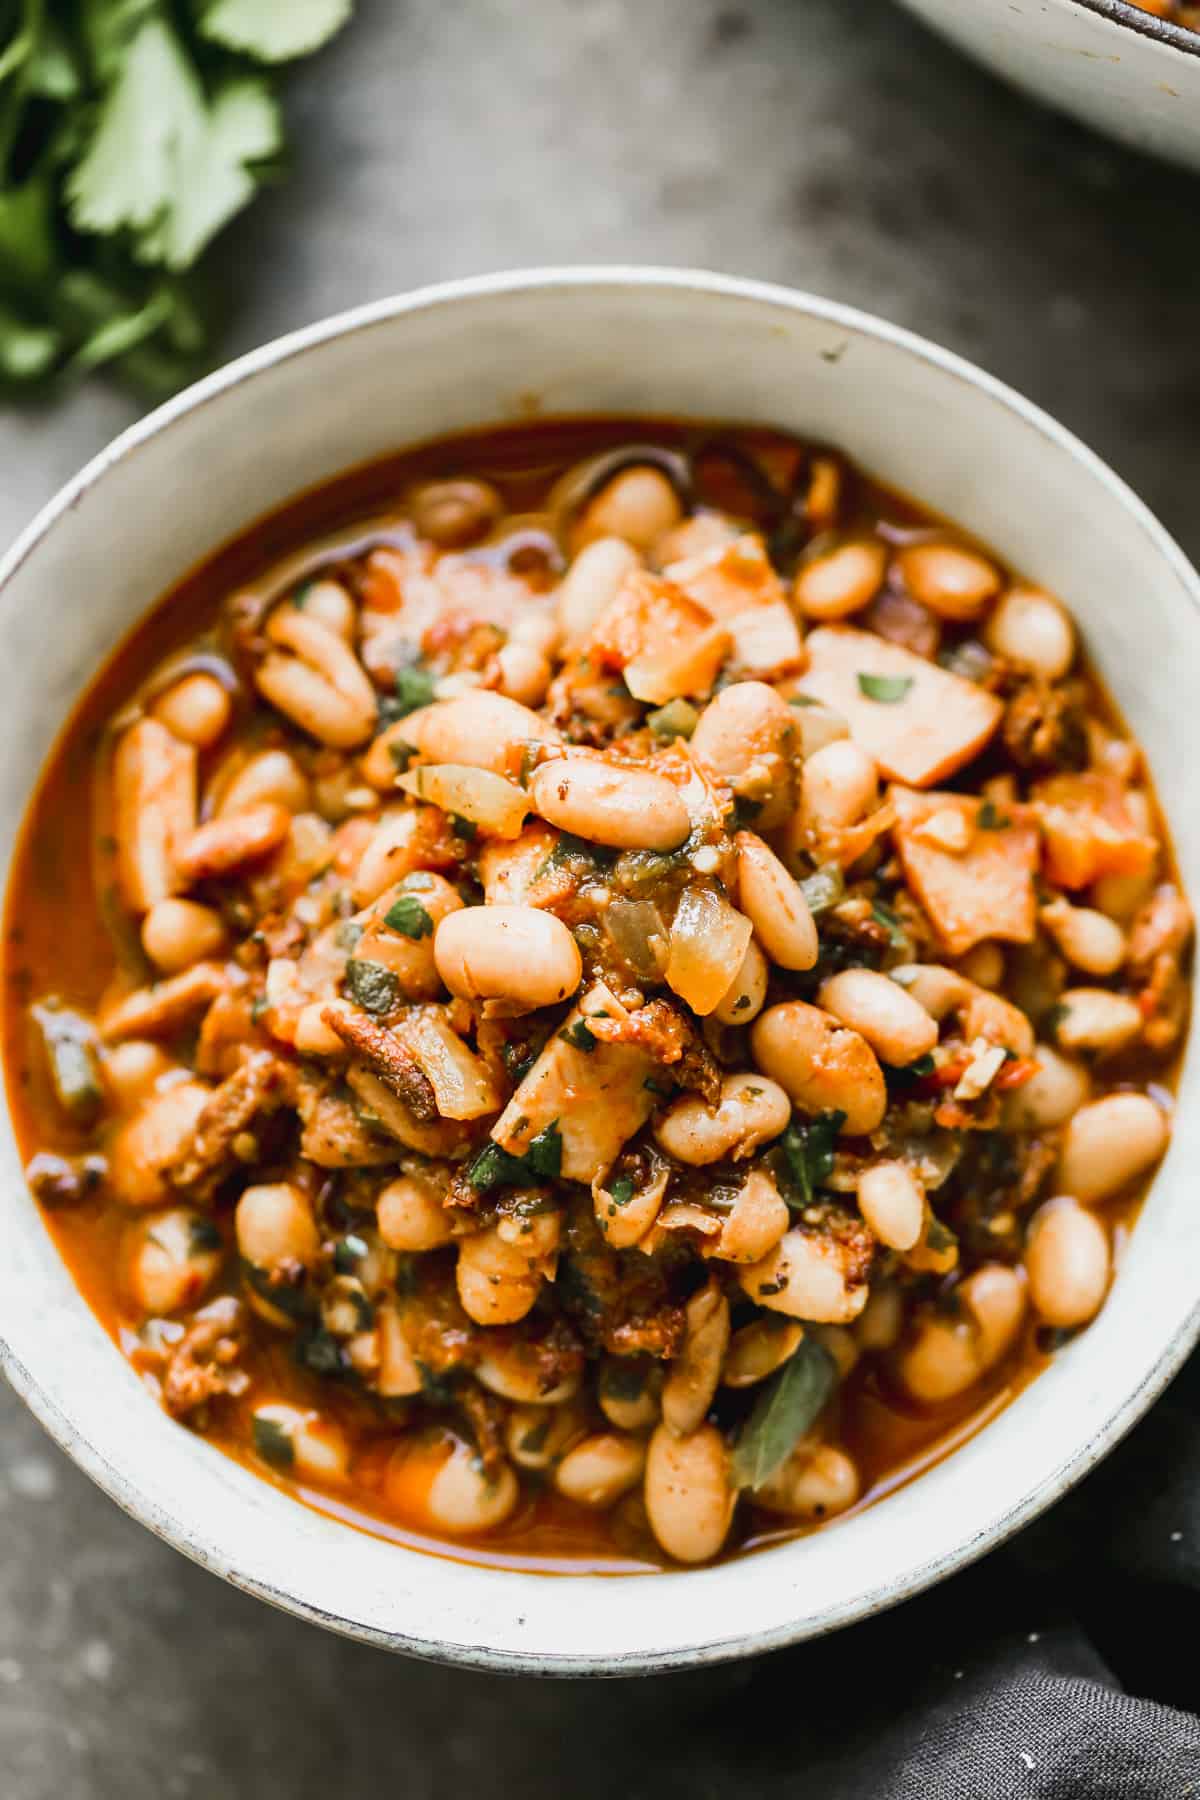 A bowl full of Borracho Beans, warm and ready to eat.